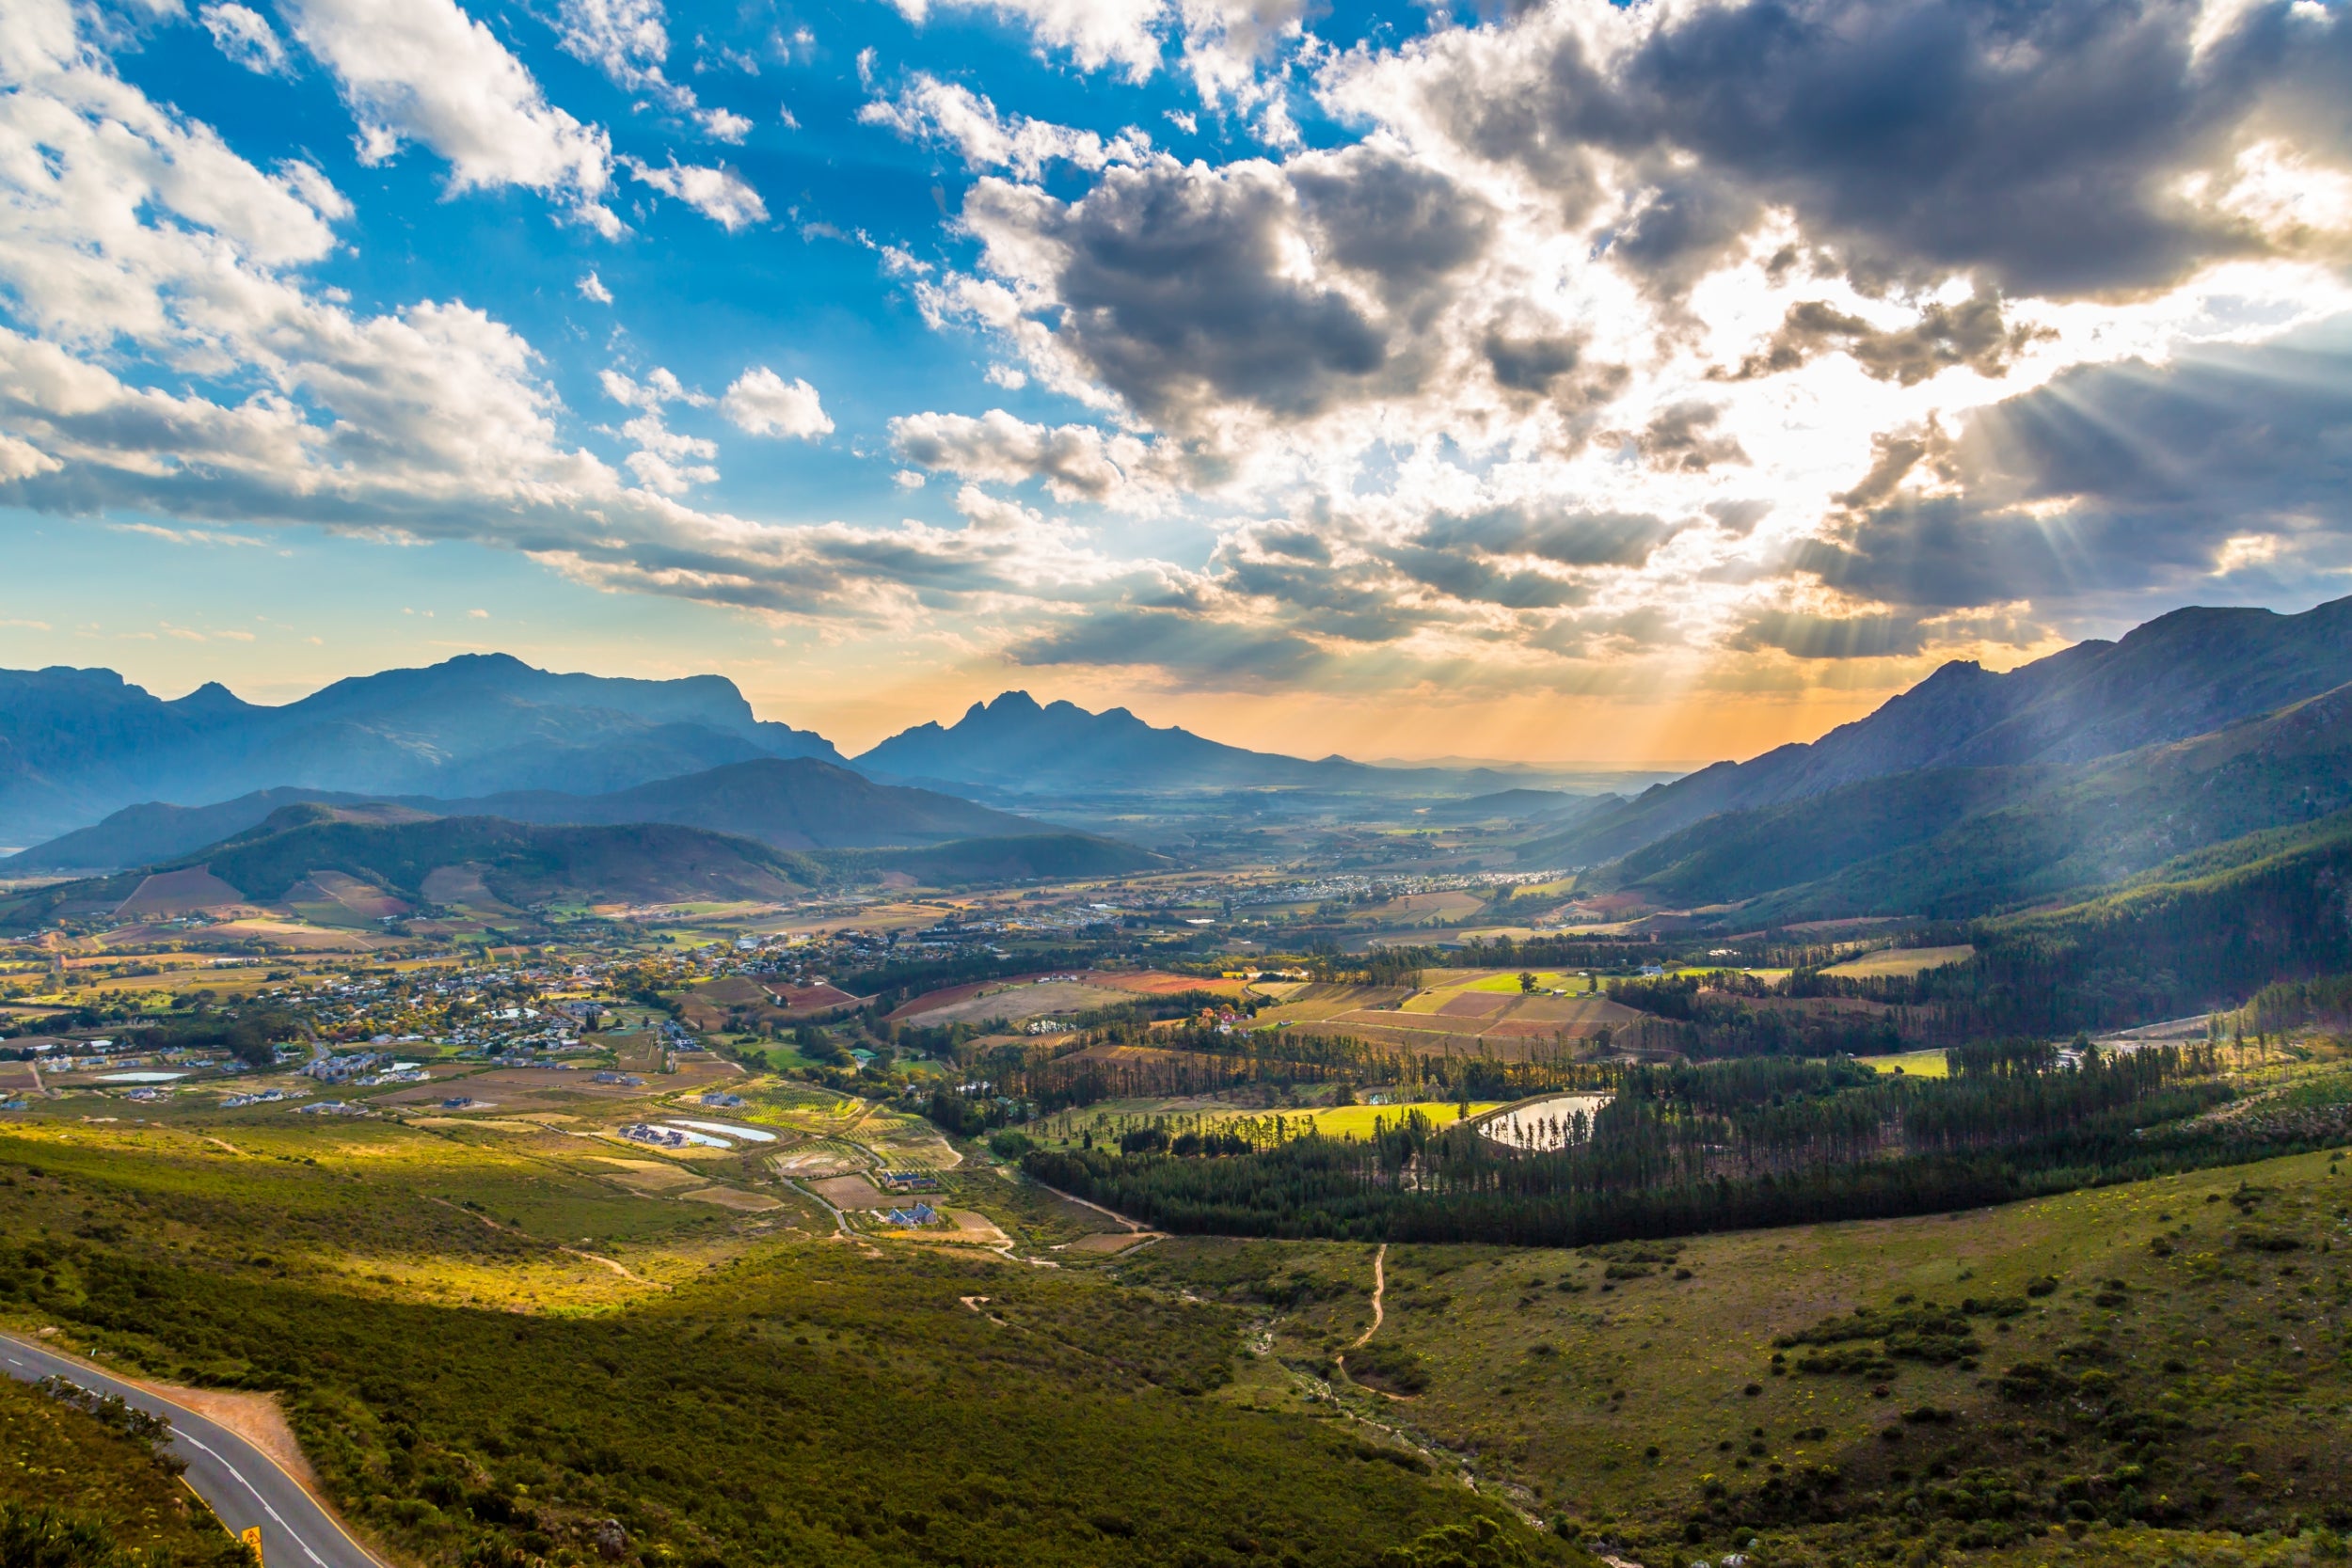 Scenic Franschhoek in the middle of the South African winelands